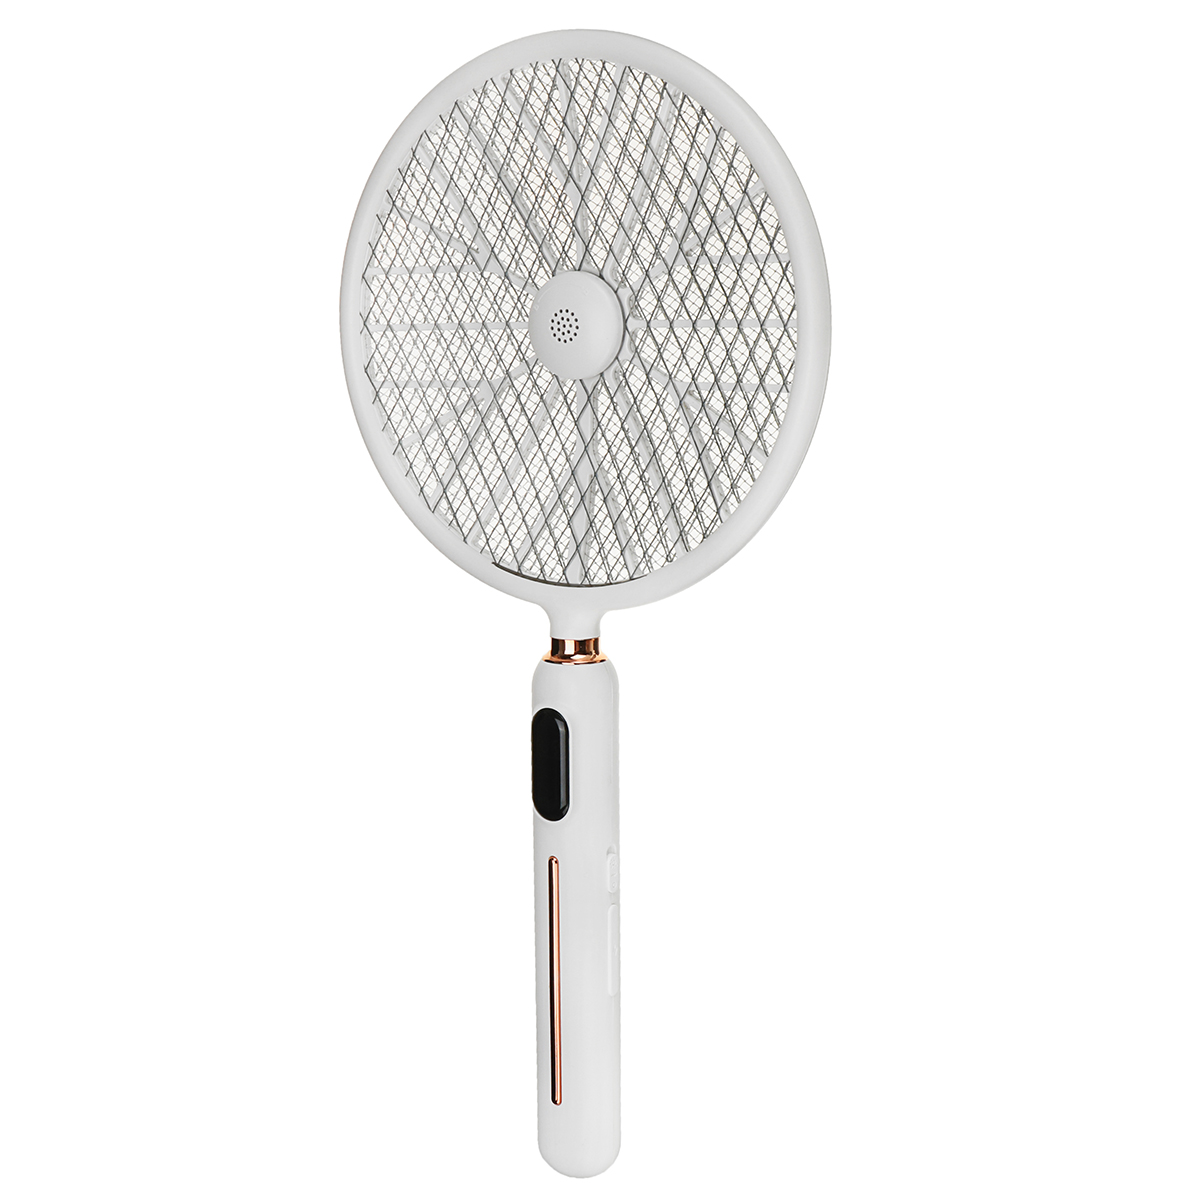 1200mAh-Mosquito-Killer-Lamp-Human-Body-Induction-Smart-Counting-Mosquito-Swatter-USB-Rechargable-LE-1937273-14